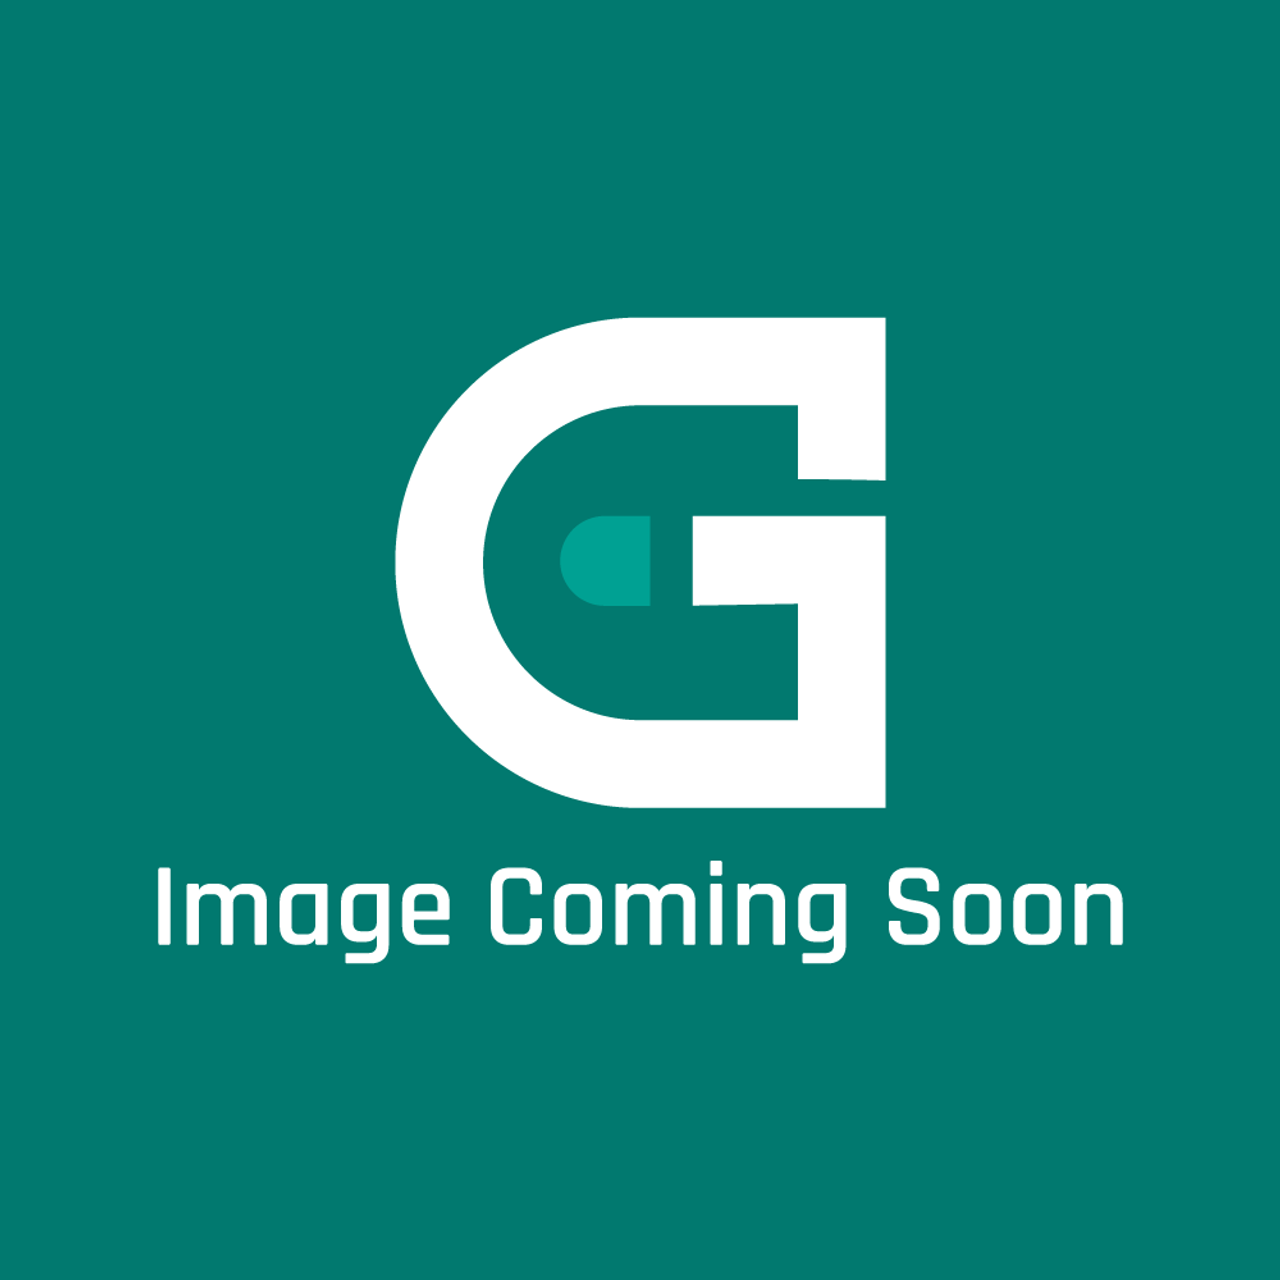 Star Mfg G9Z6605 - Controller Gas Oven 120V - Image Coming Soon!